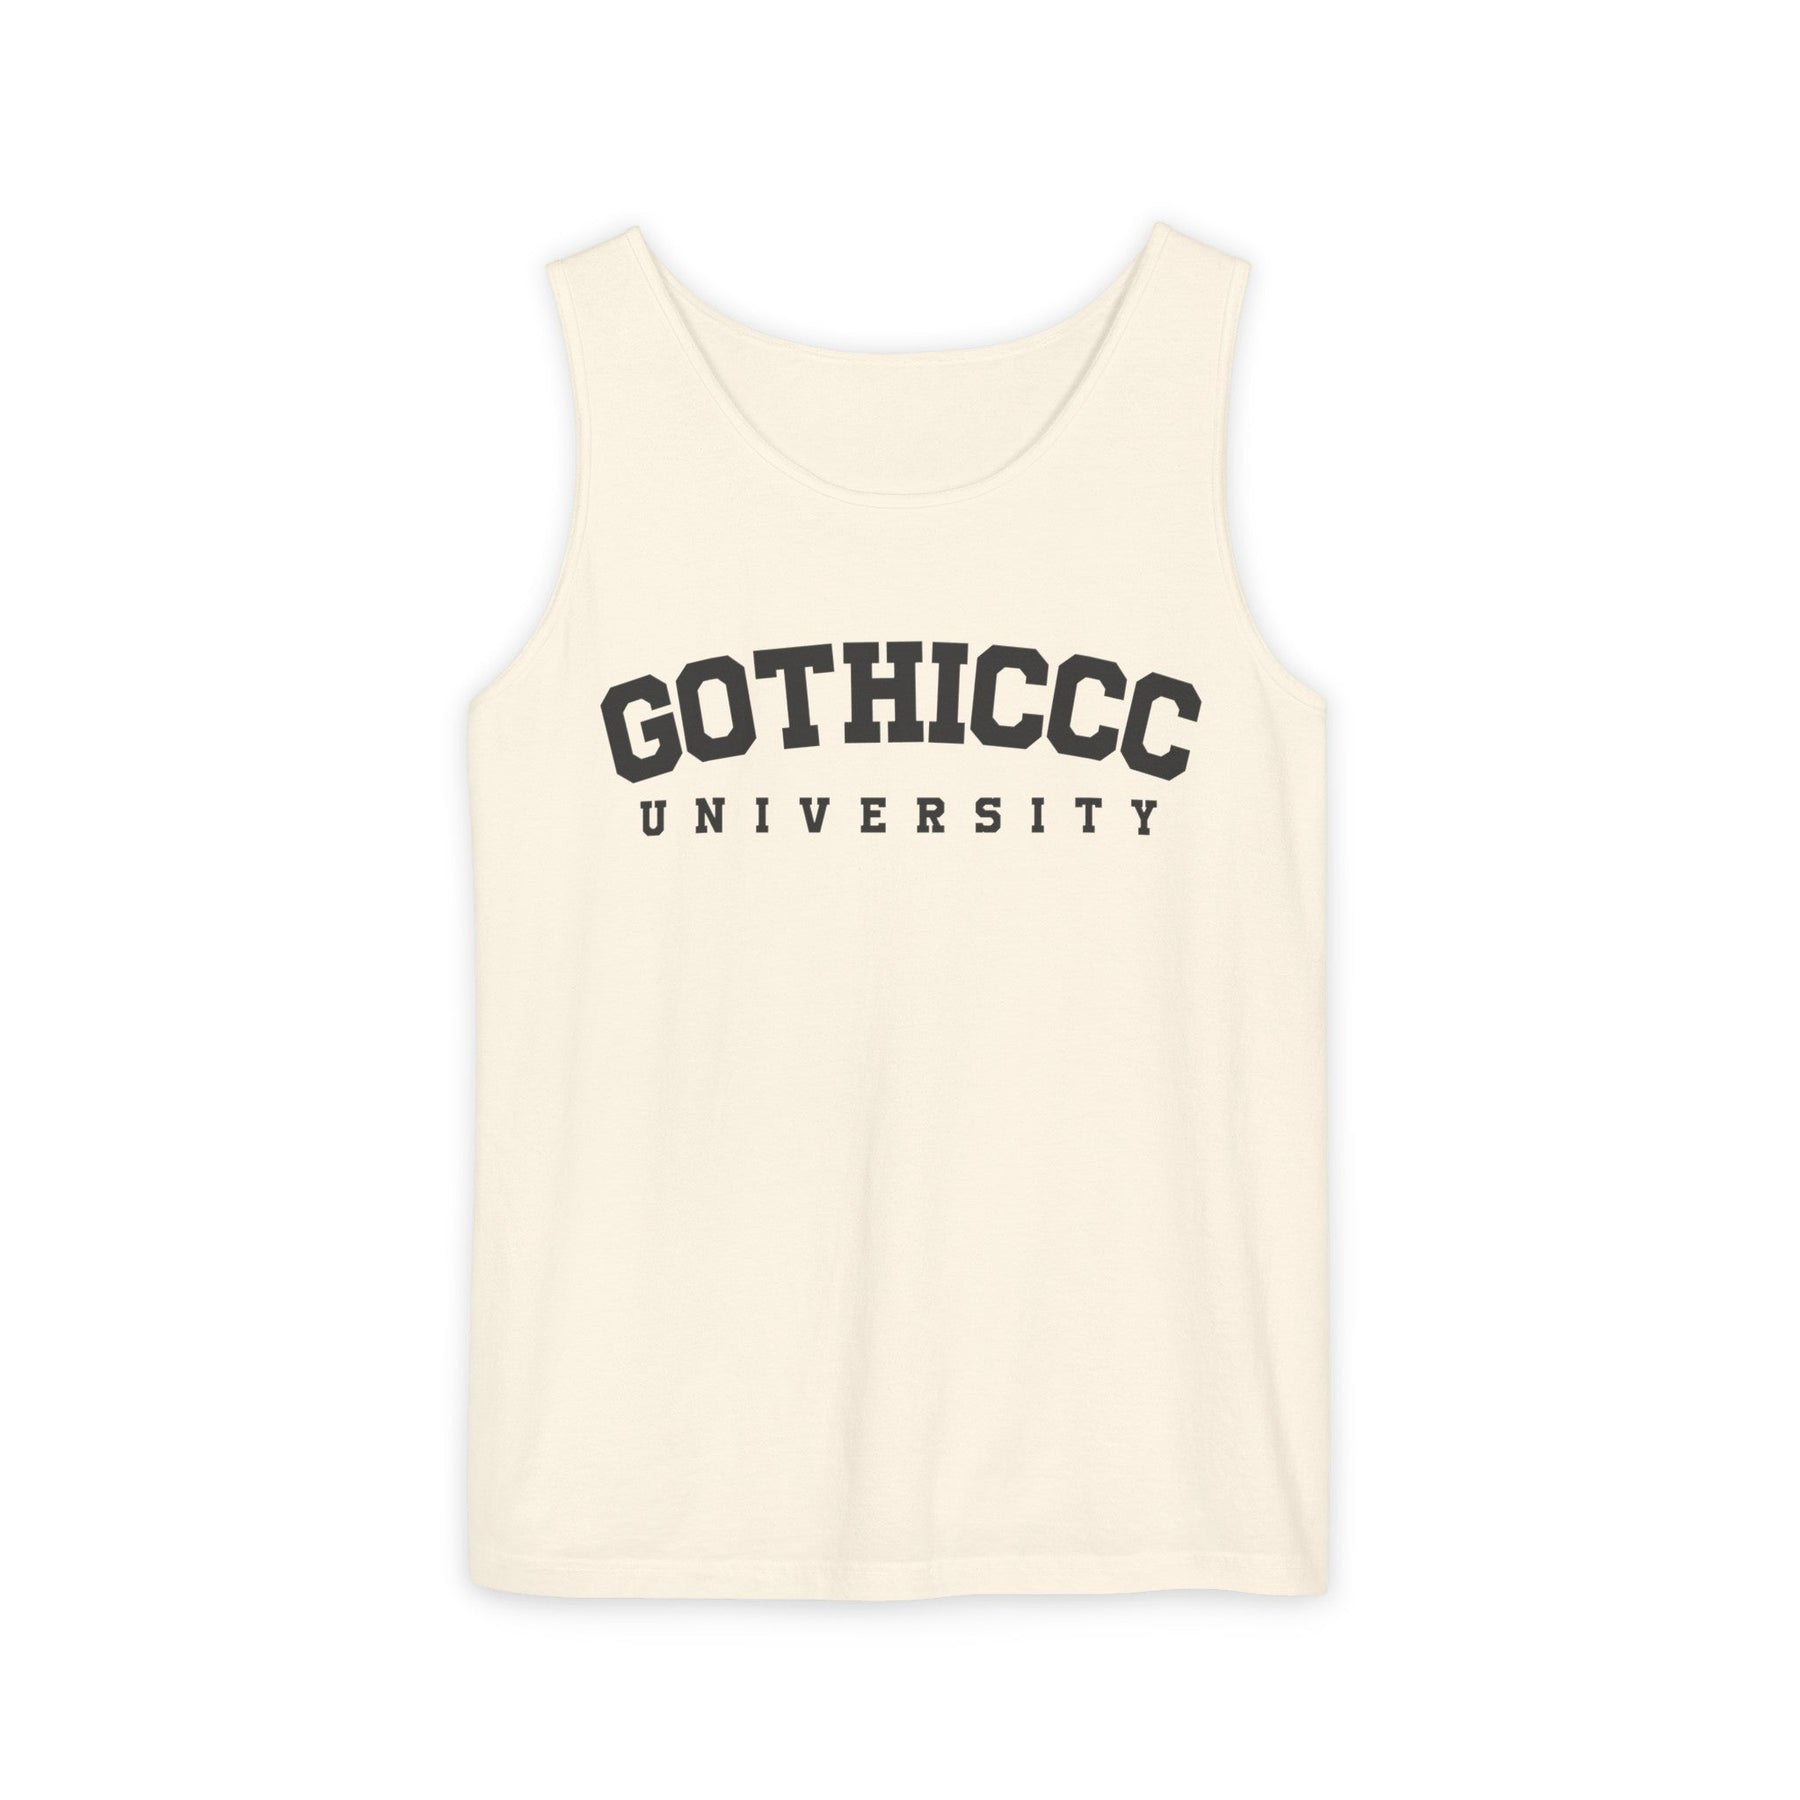 Gothiccc University Unisex Tank Top - Goth Cloth Co.Tank Top15960530876506822522